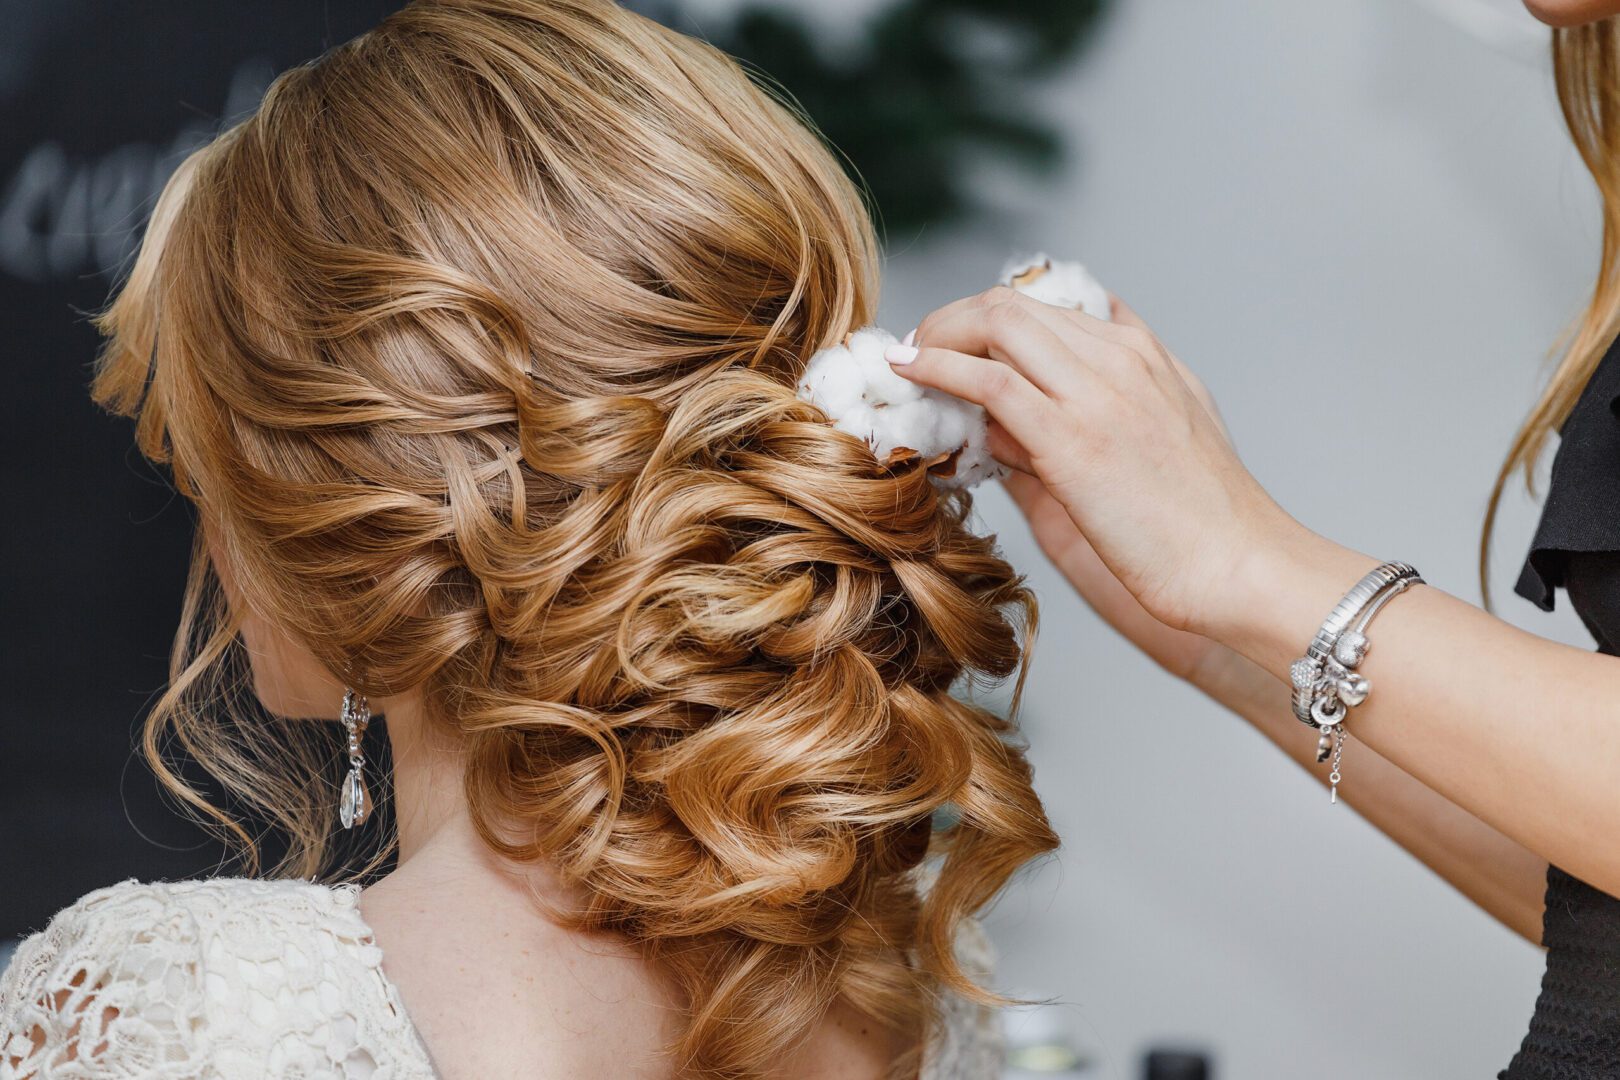 A person adding accessories to someone’s hair